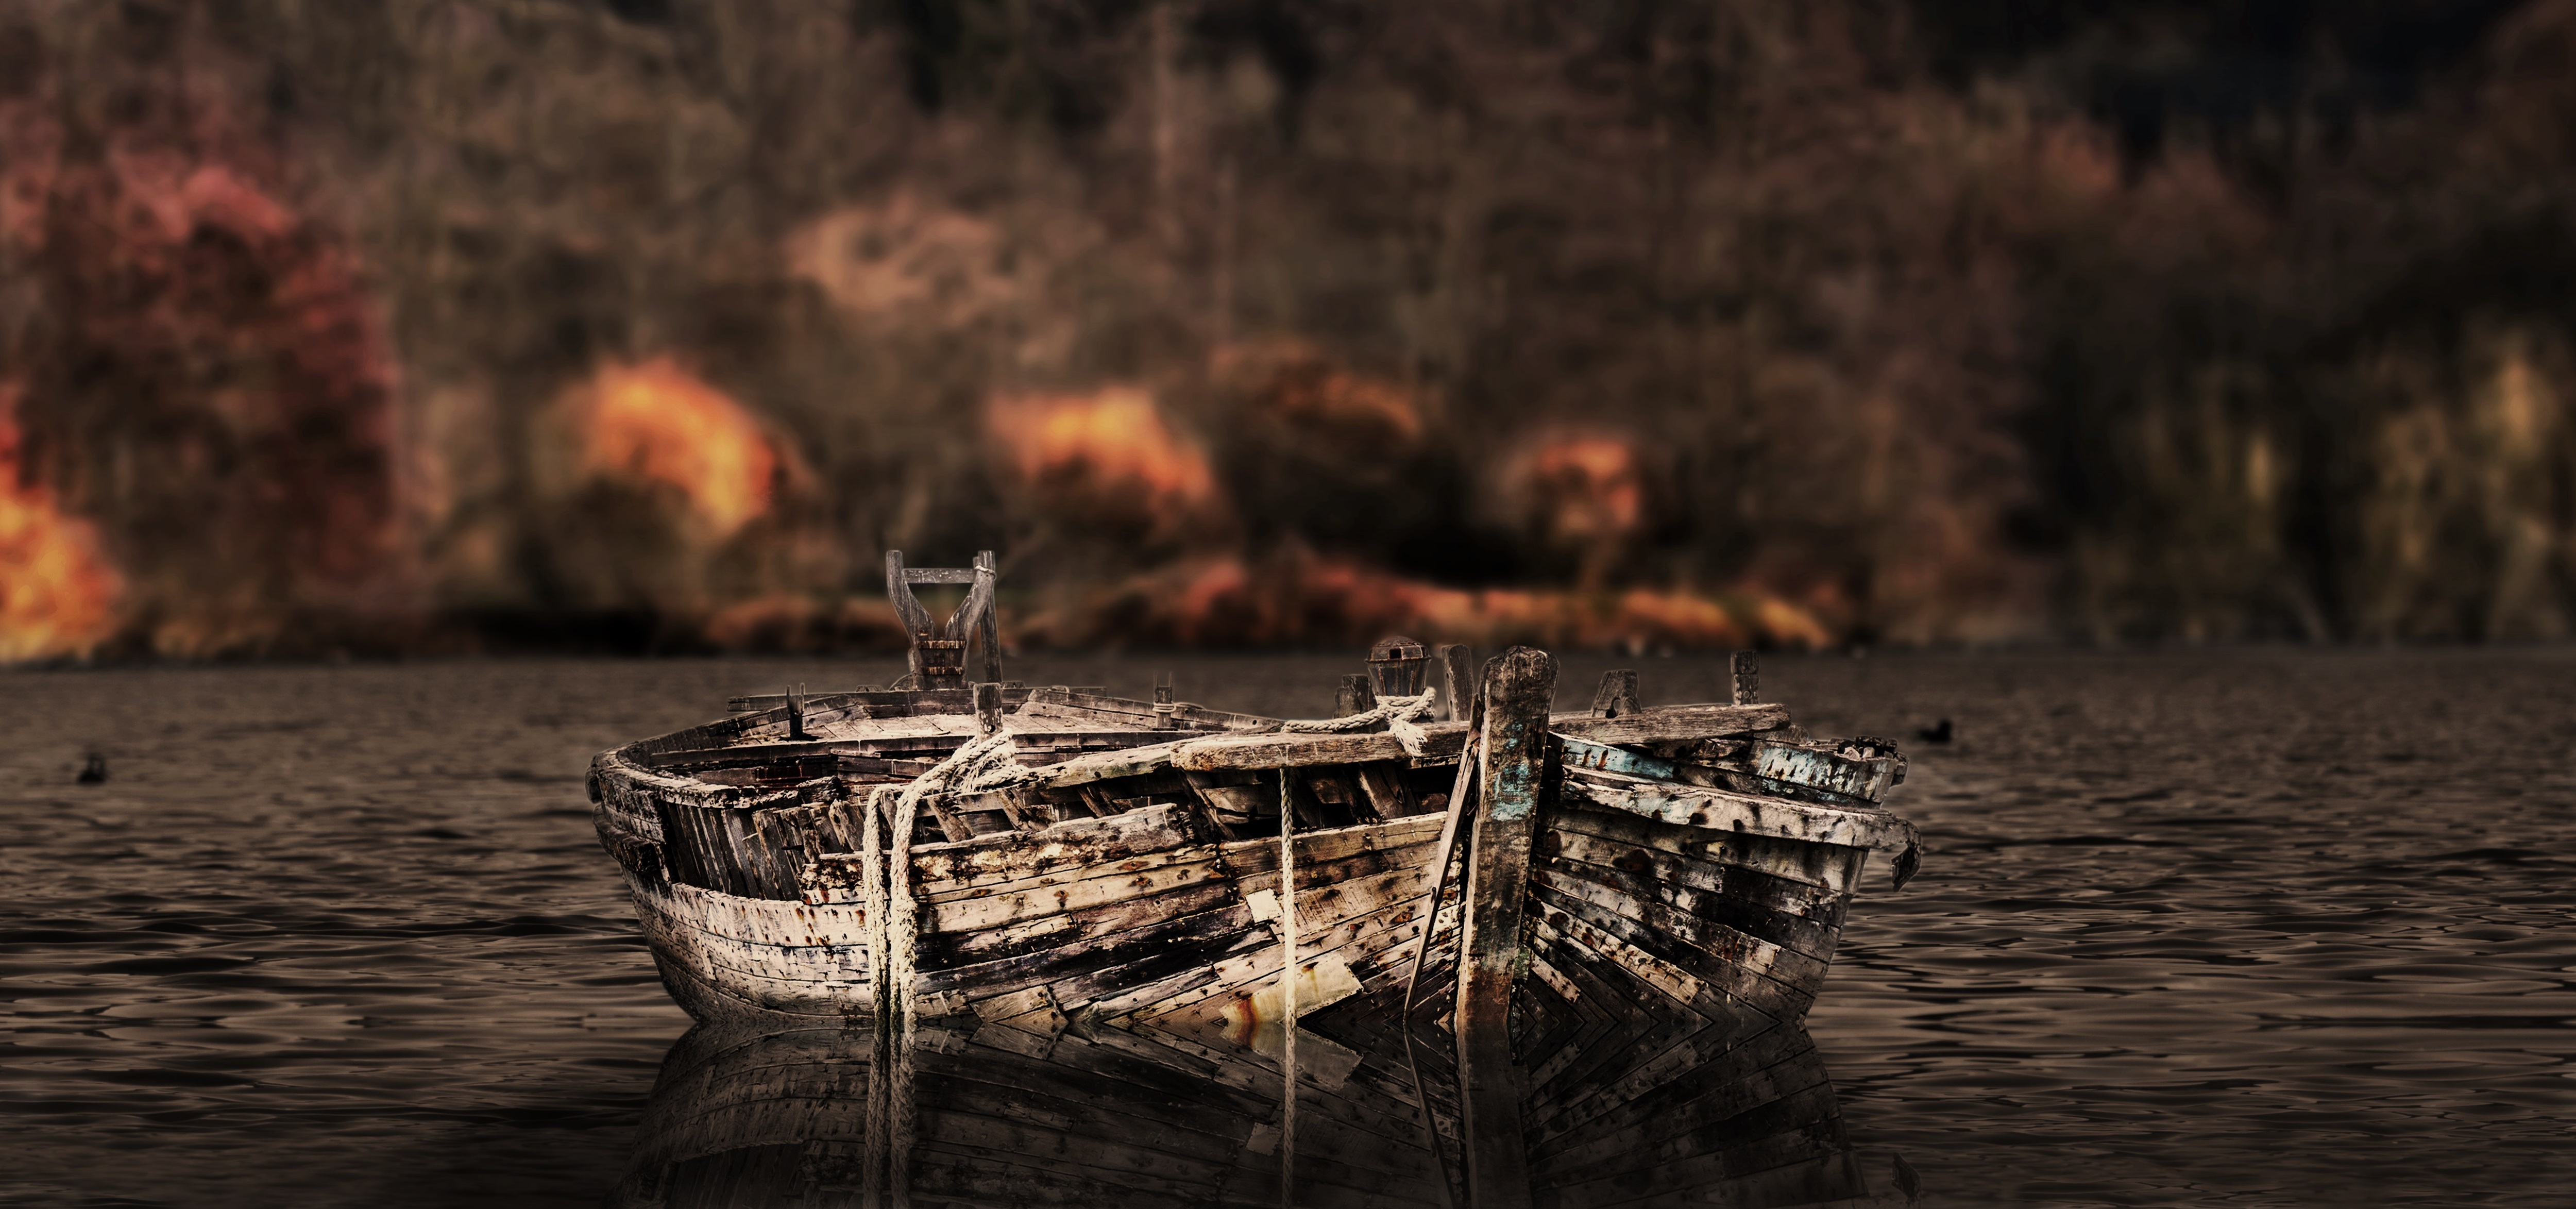 Old Wooden Rowboat On A Lake 4k Ultra HD Wallpaper Background